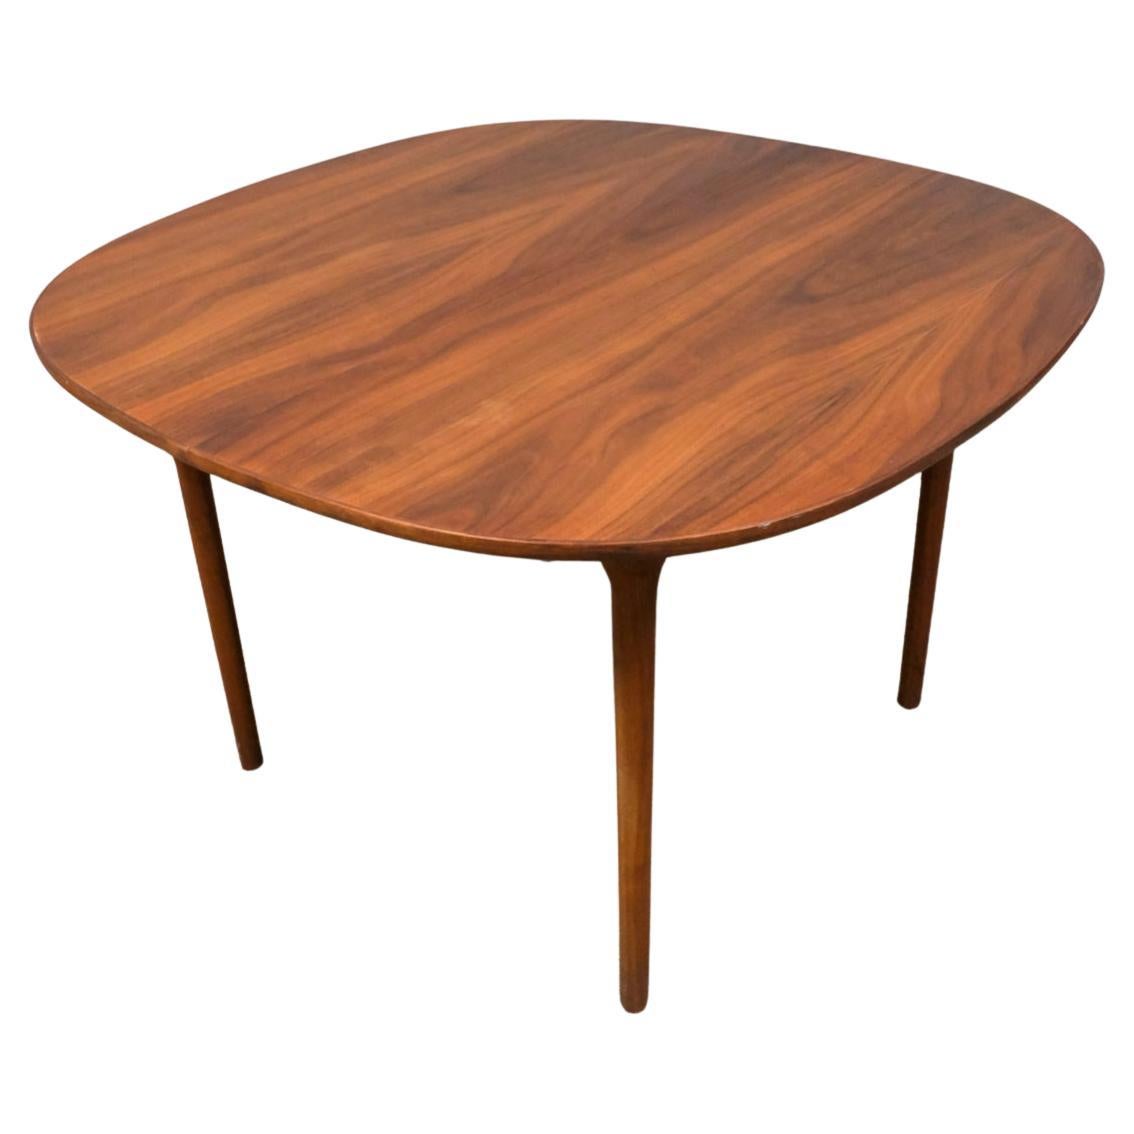 Scandinavian Modern Stunning Mid century modern danish teak rounded dining table with two leaves For Sale